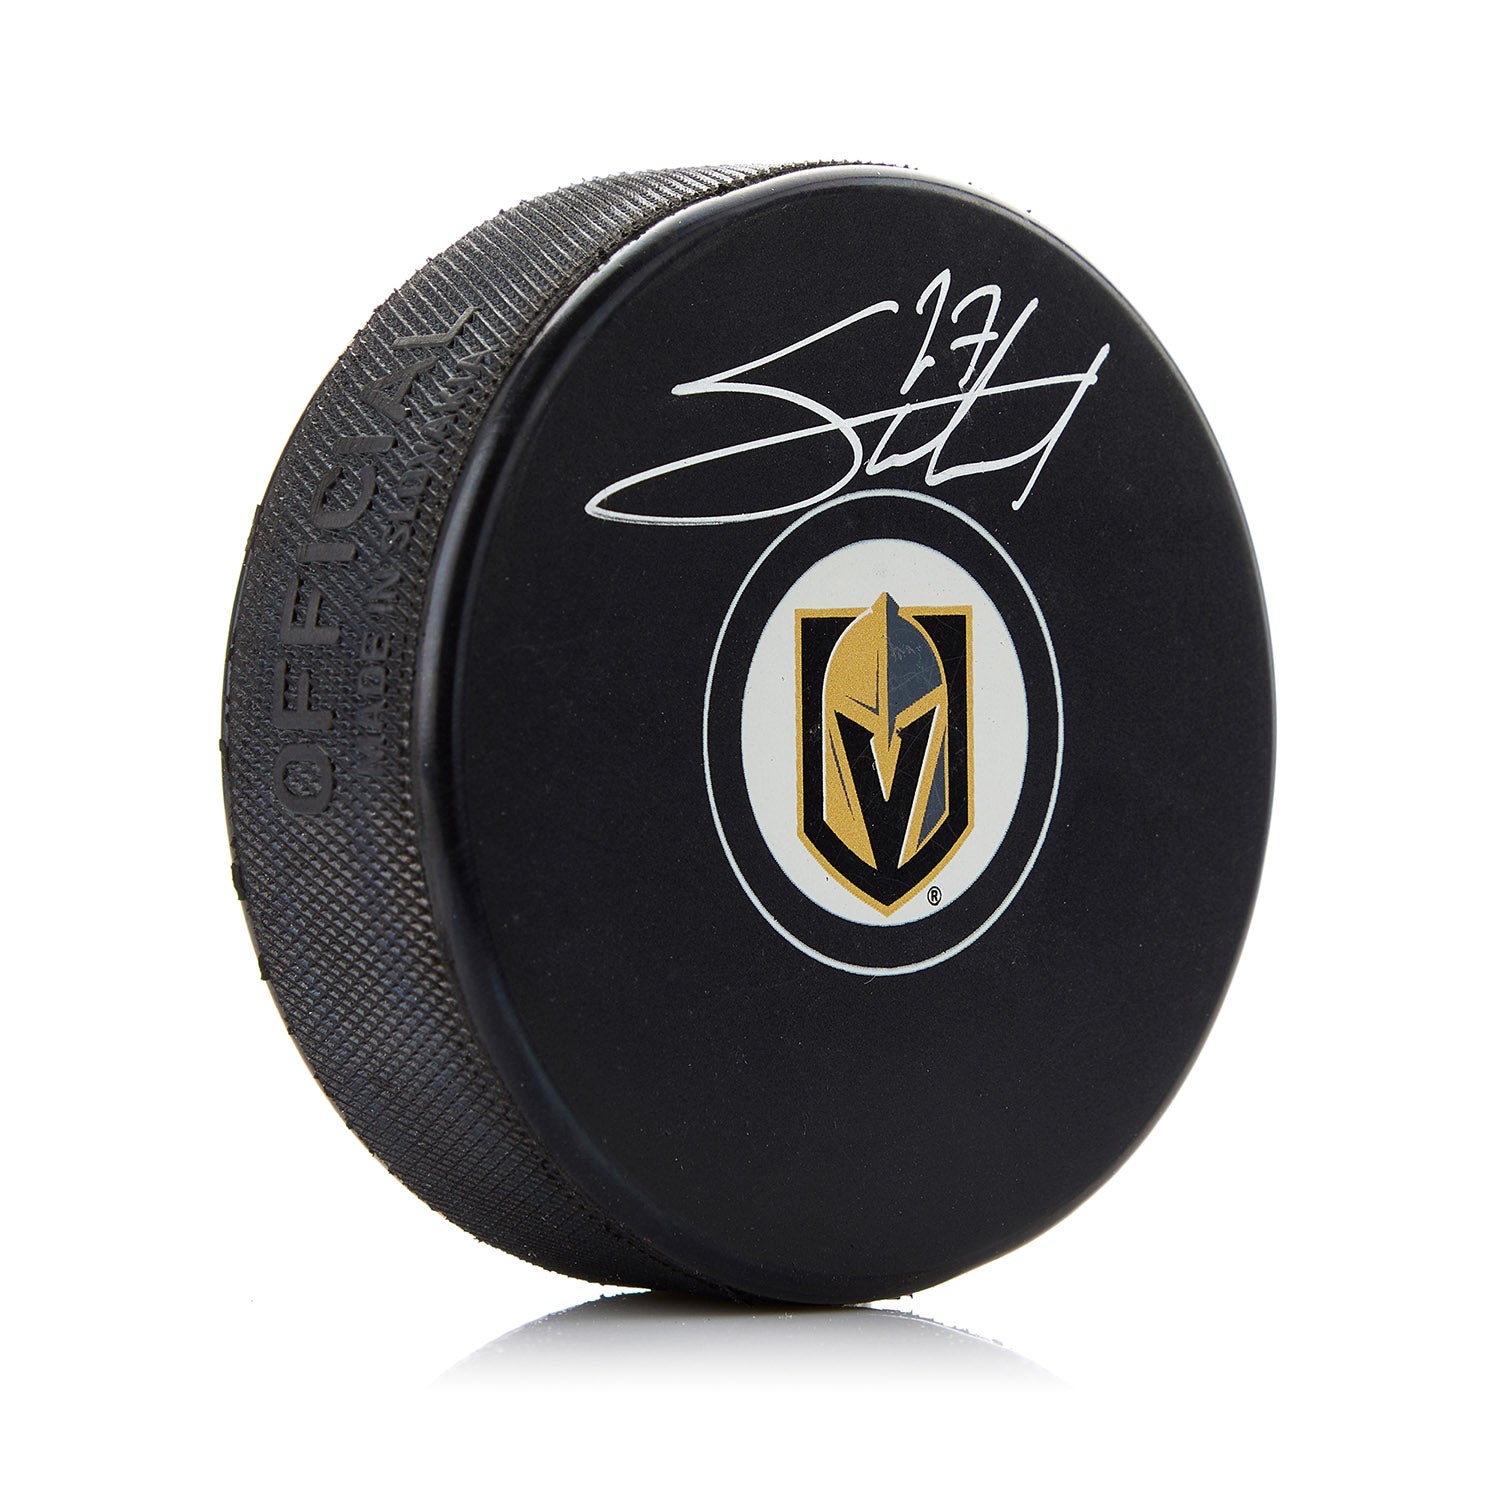 Shea Theodore Vegas Golden Knights Autographed Hockey Puck